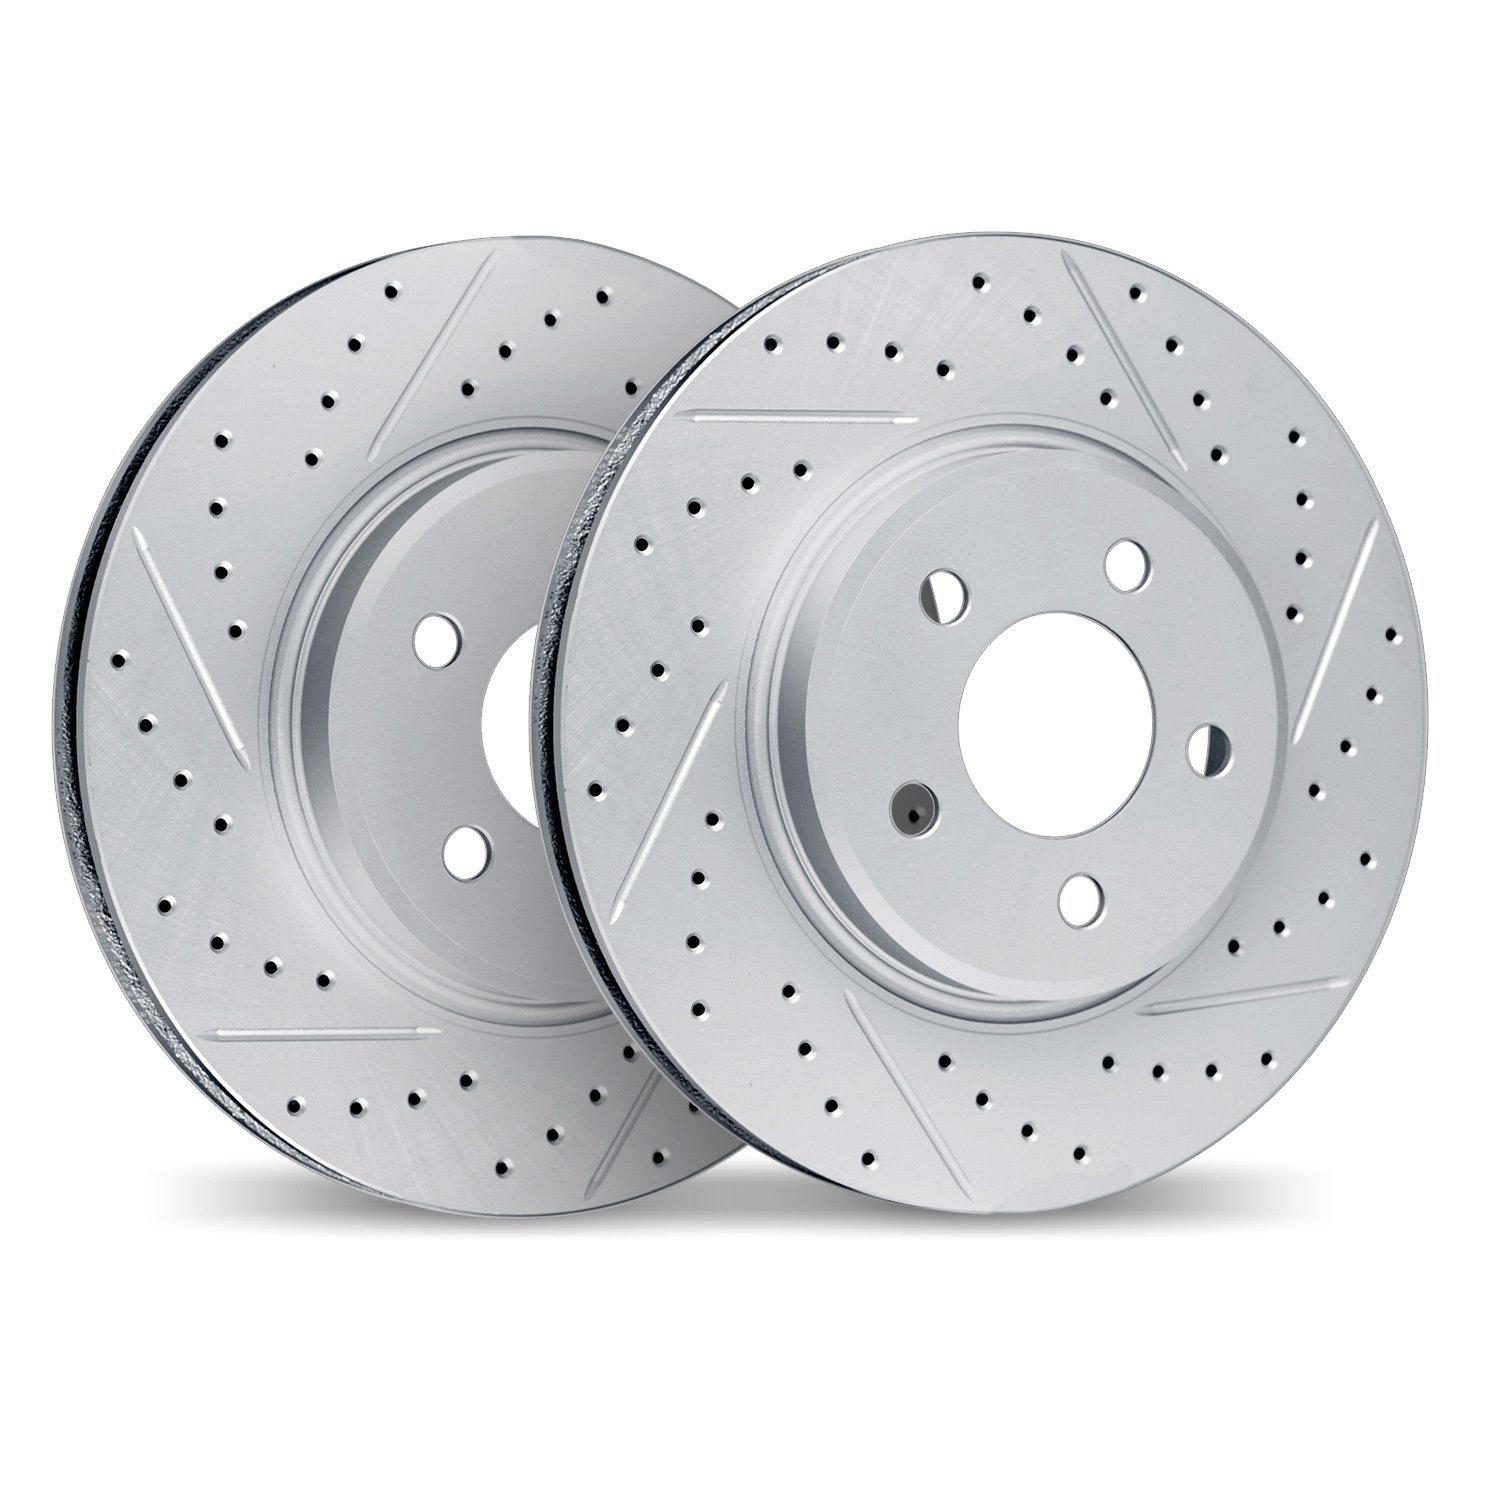 2002-46007 Geoperformance Drilled/Slotted Brake Rotors, 2014-2020 GM, Position: Front